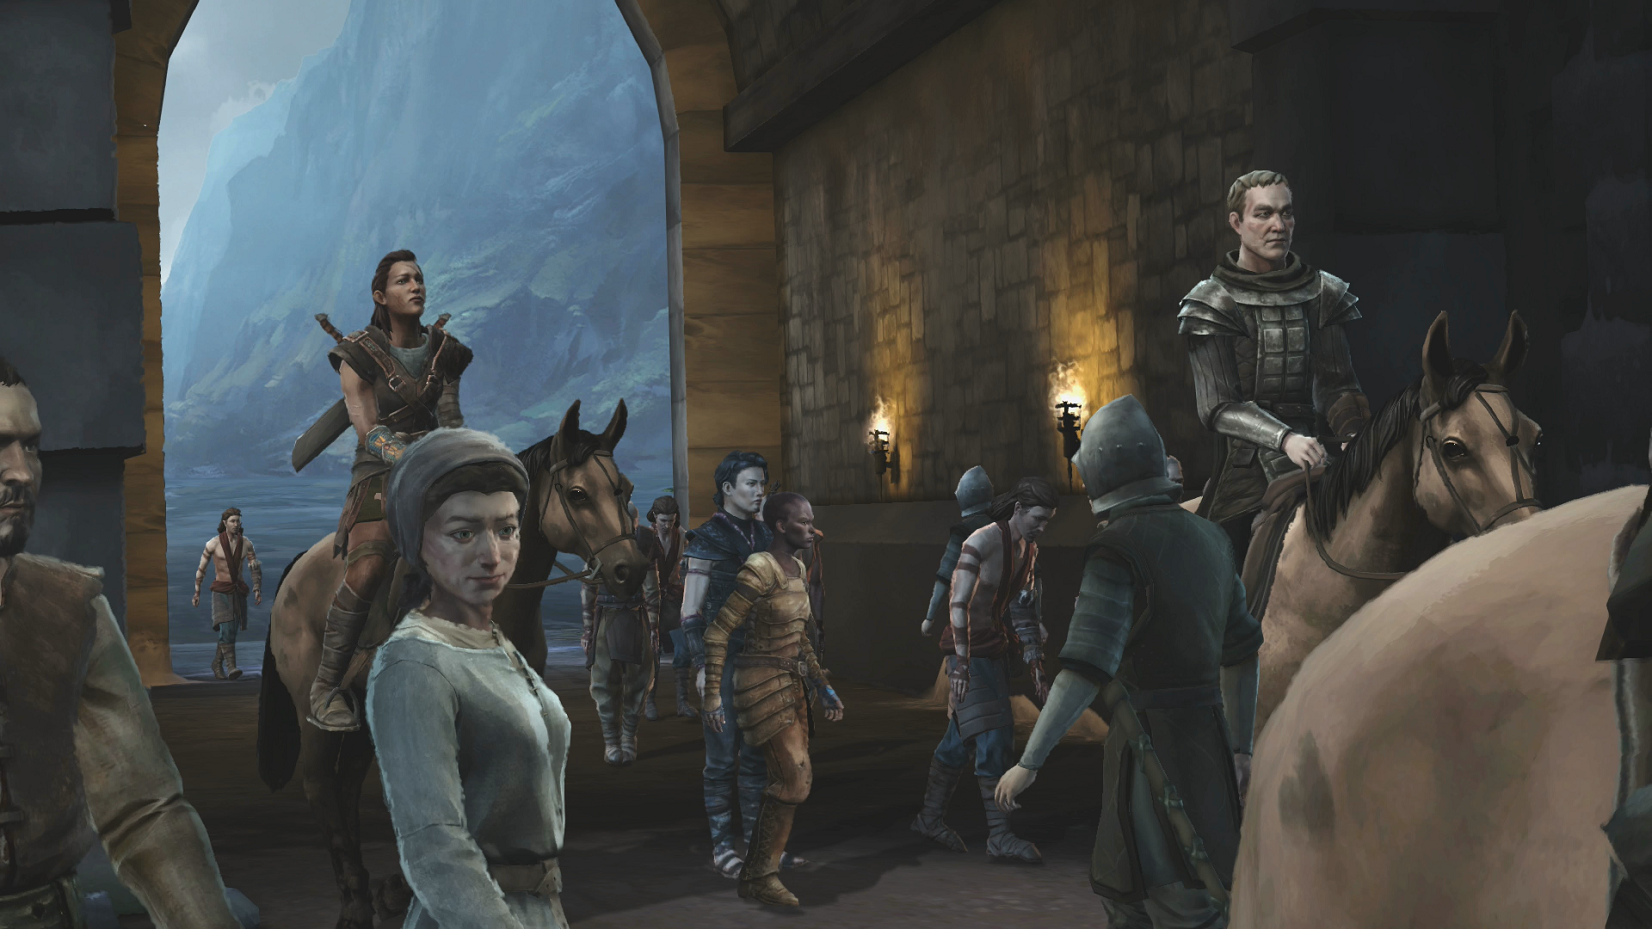 Game of Thrones: The Ice Dragon Review